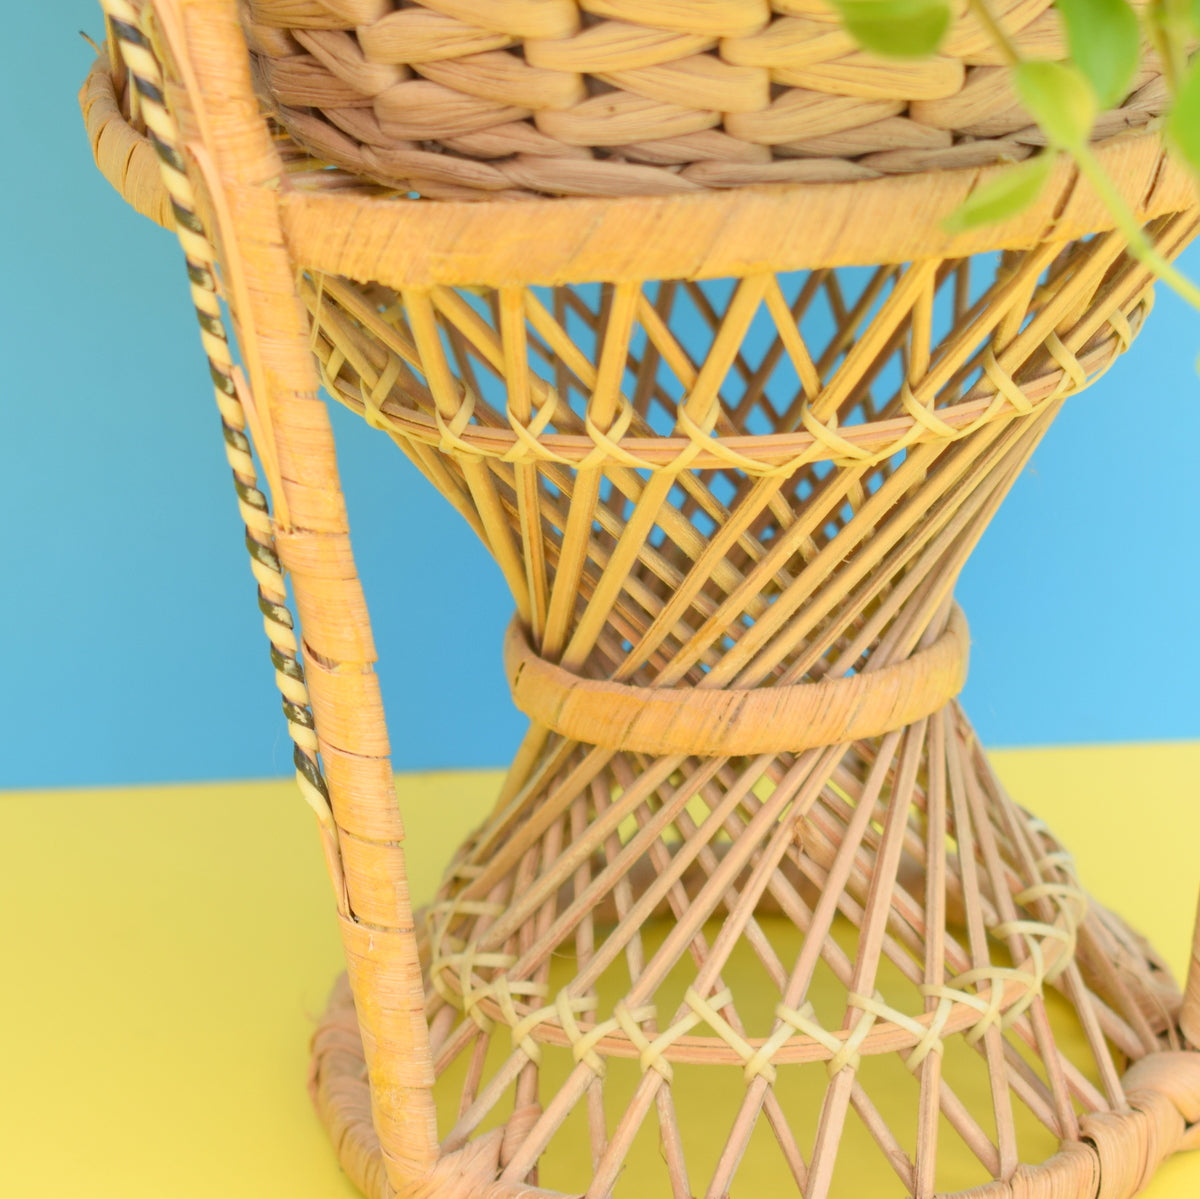 Vintage 1970s Mini Wicker Peacock Chair / Plant Stand - Natural